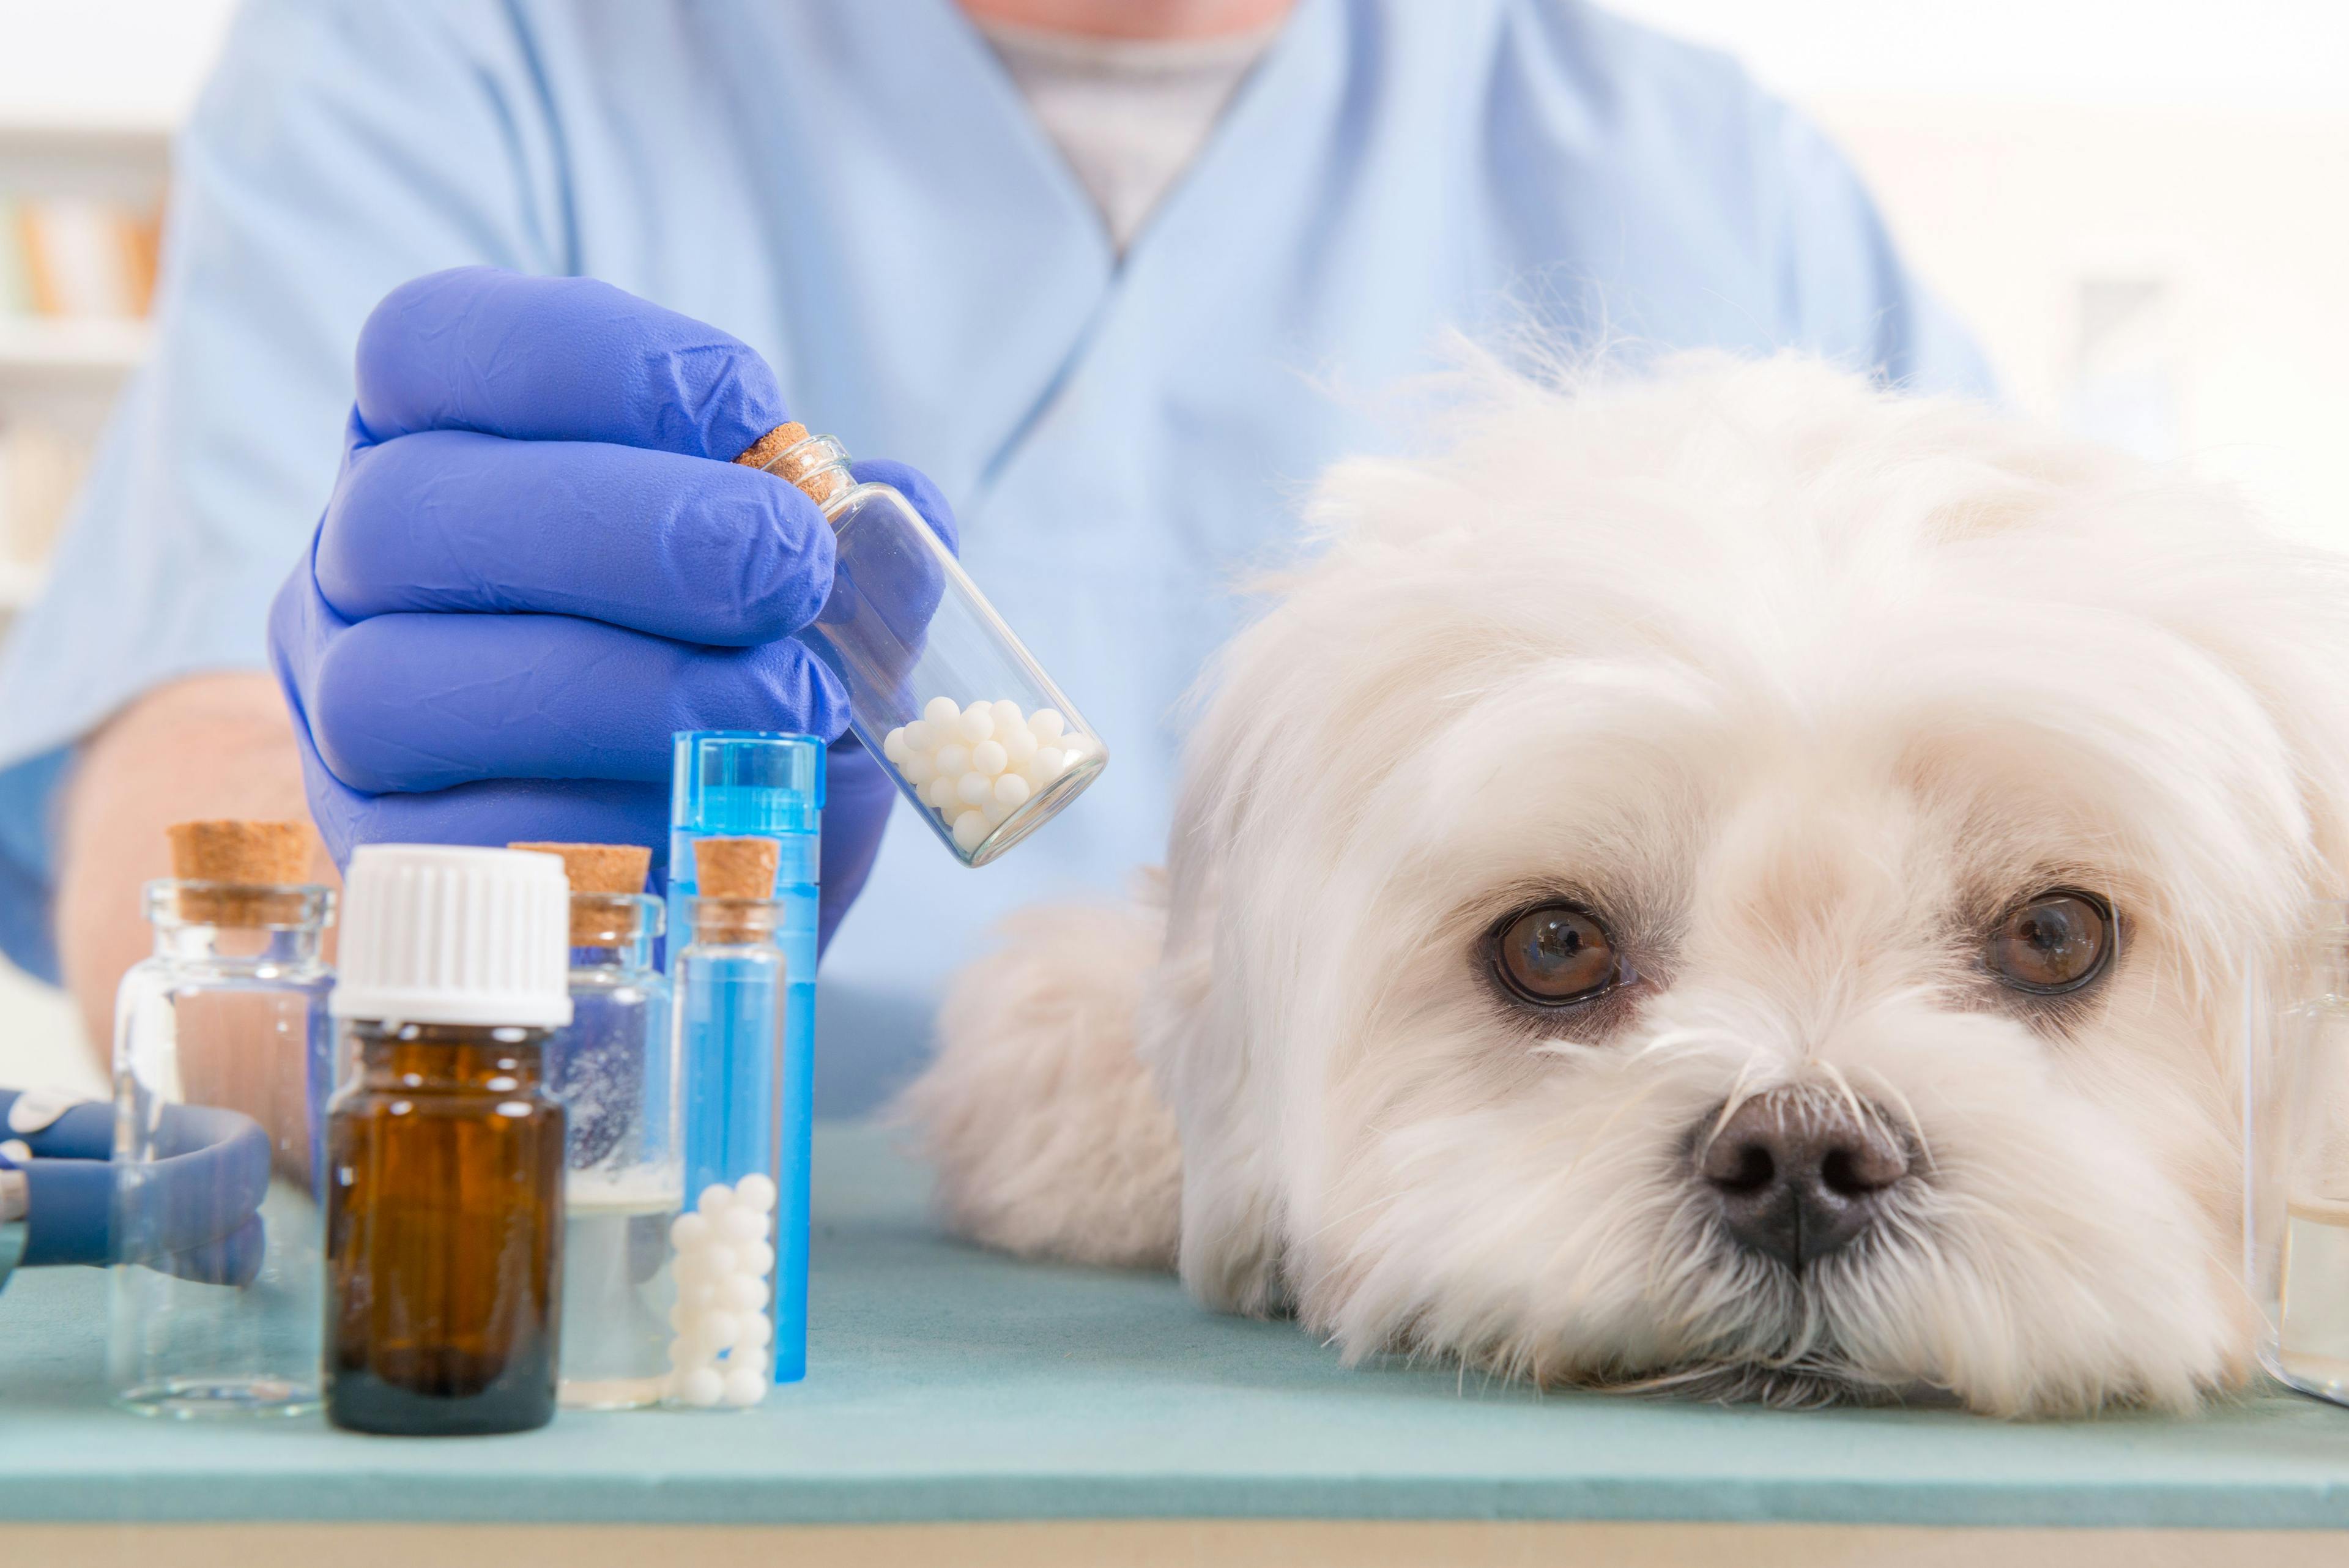 Vet-shopping and potential controlled substance misuse in pet owners